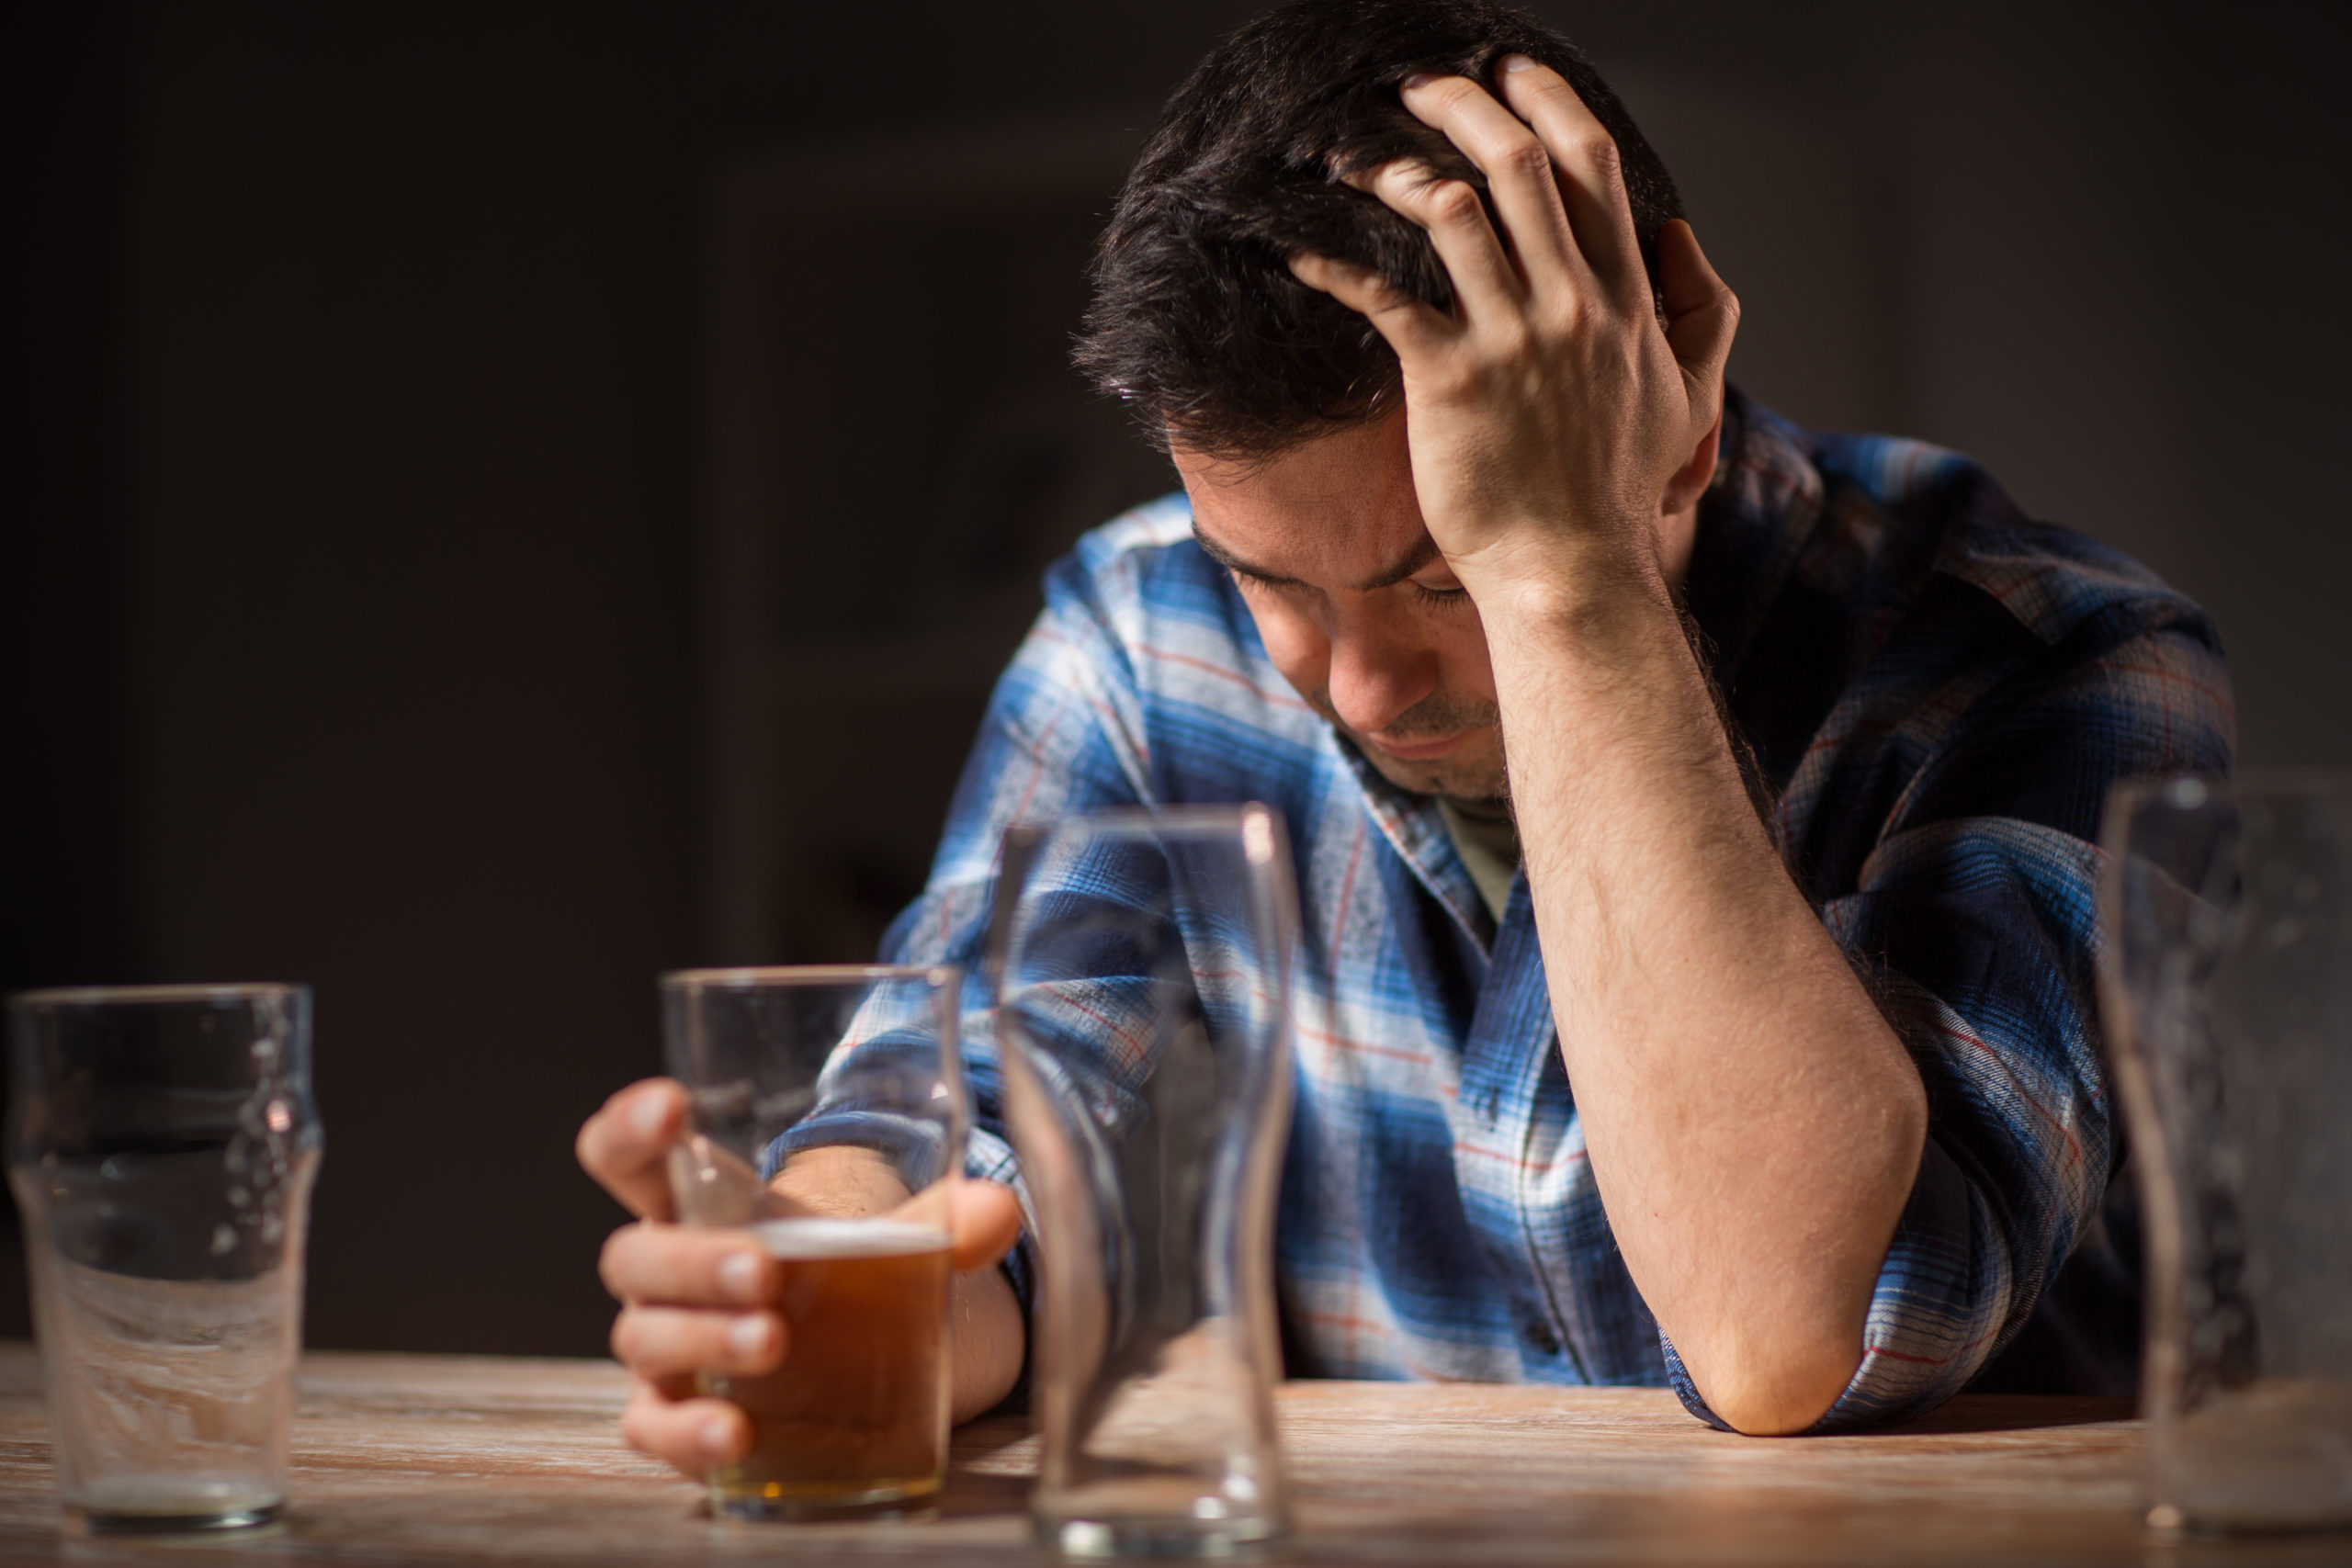 How Do I Help A Recovering Alcoholic